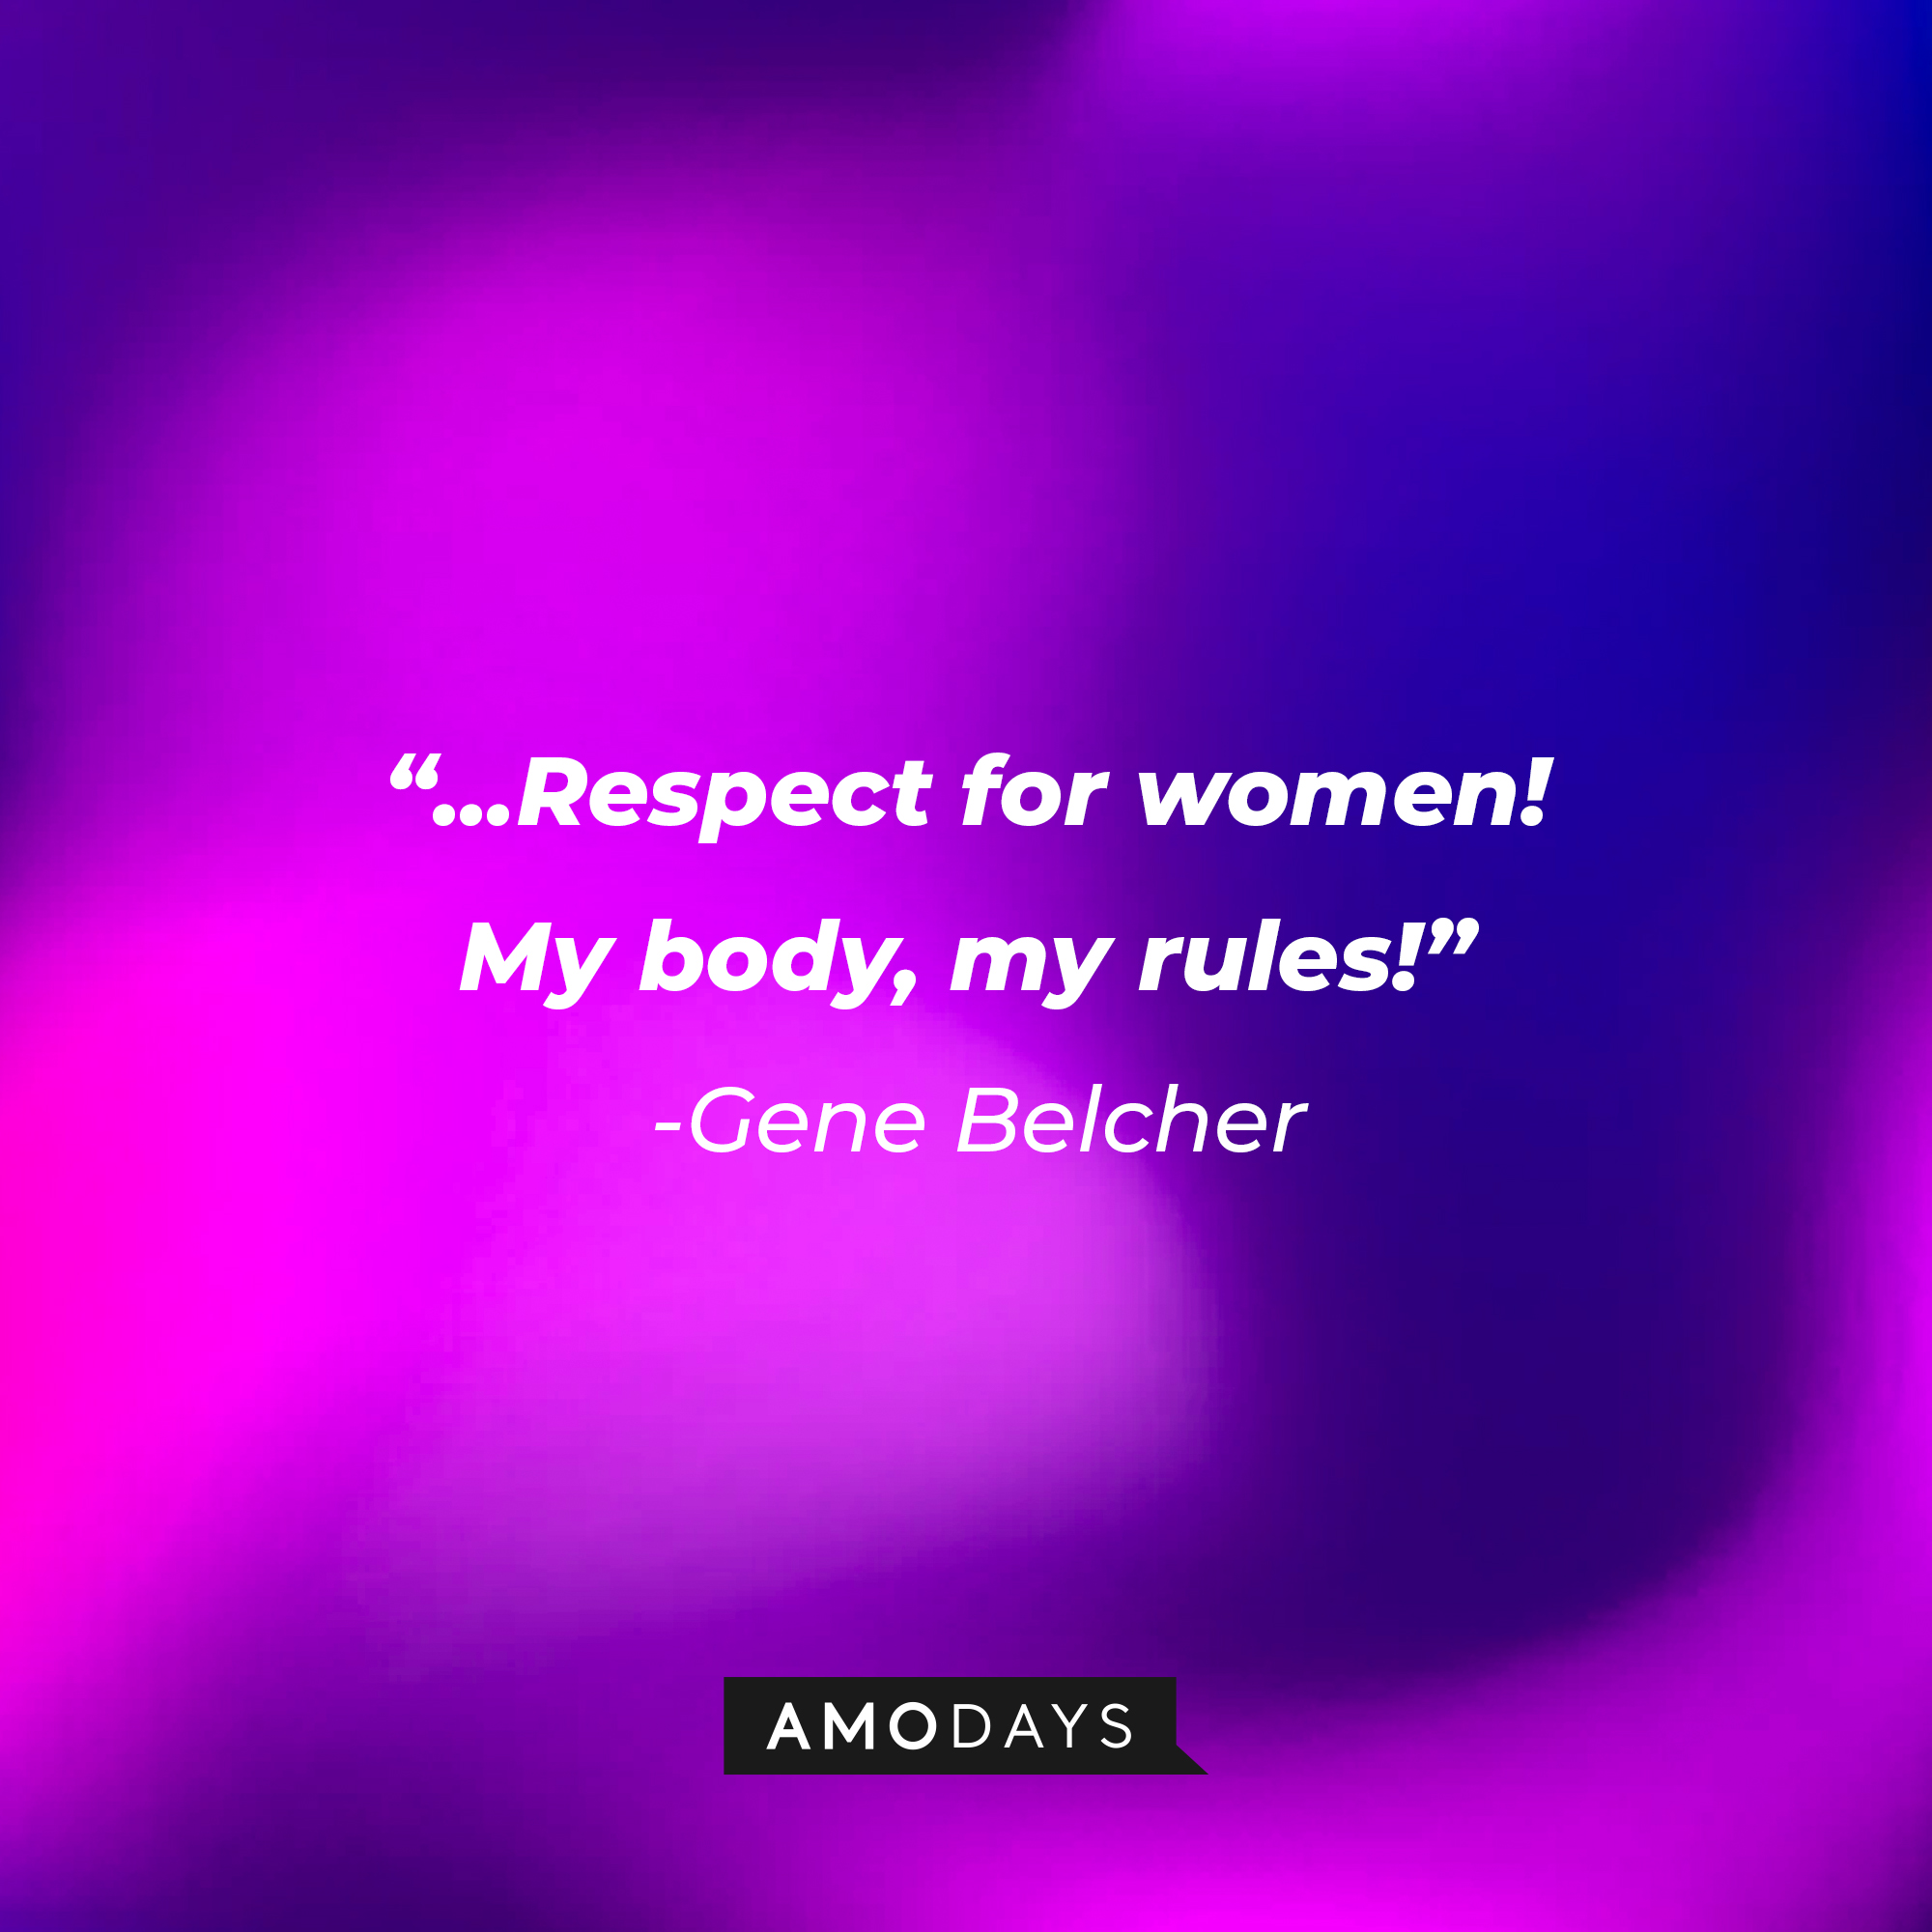 Gene Belcher's quote: "...Respect for women! My body, my rules!” | Source: Amodays